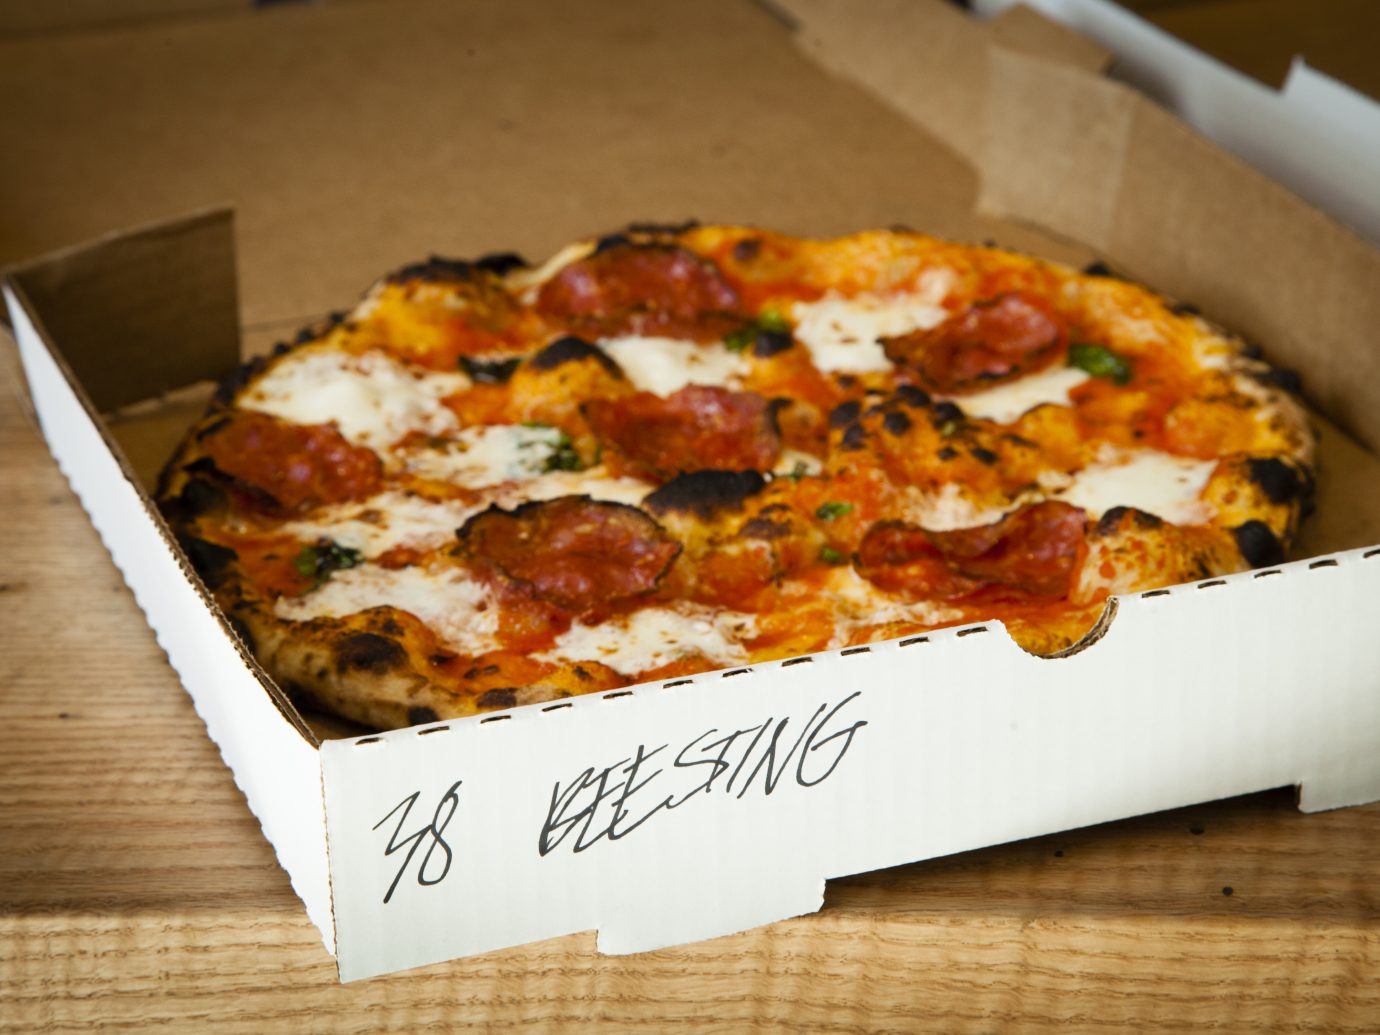 Roberta's Take-Out and Delivery Space, Brooklyn, NY; Beesting pizza in a to-go box. (Photograph by Deidre Schoo)